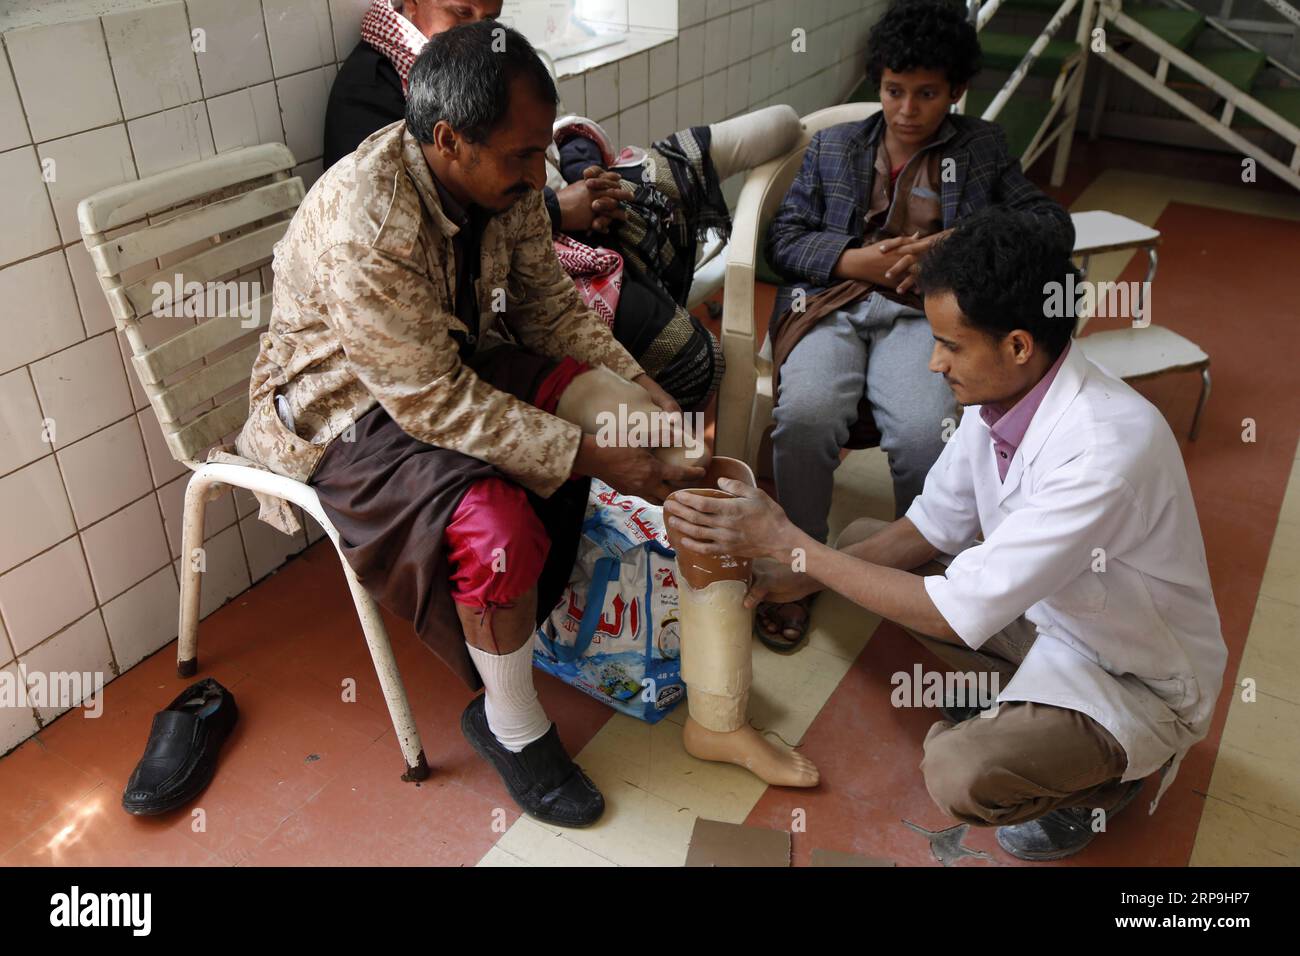 (190407) -- SANAA, April 7, 2019 -- A doctor offers a landmine victim a prosthetic limb at a rehabilitation center in Sanaa, Yemen, on April 7, 2019. Large swathes of Yemen have been swamped by randomly-planted landmines, which are posing a lingering threat to the lives of citizens across the war-torn country. According to the United Nations, thousands of landmines, unexploded ordnance and other explosive war remnants have been left behind during the ongoing conflict in Yemen which has just entered its fifth year. ) YEMEN-SANAA-LANDMINES-VICTIMS MohammedxMohammed PUBLICATIONxNOTxINxCHN Stock Photo